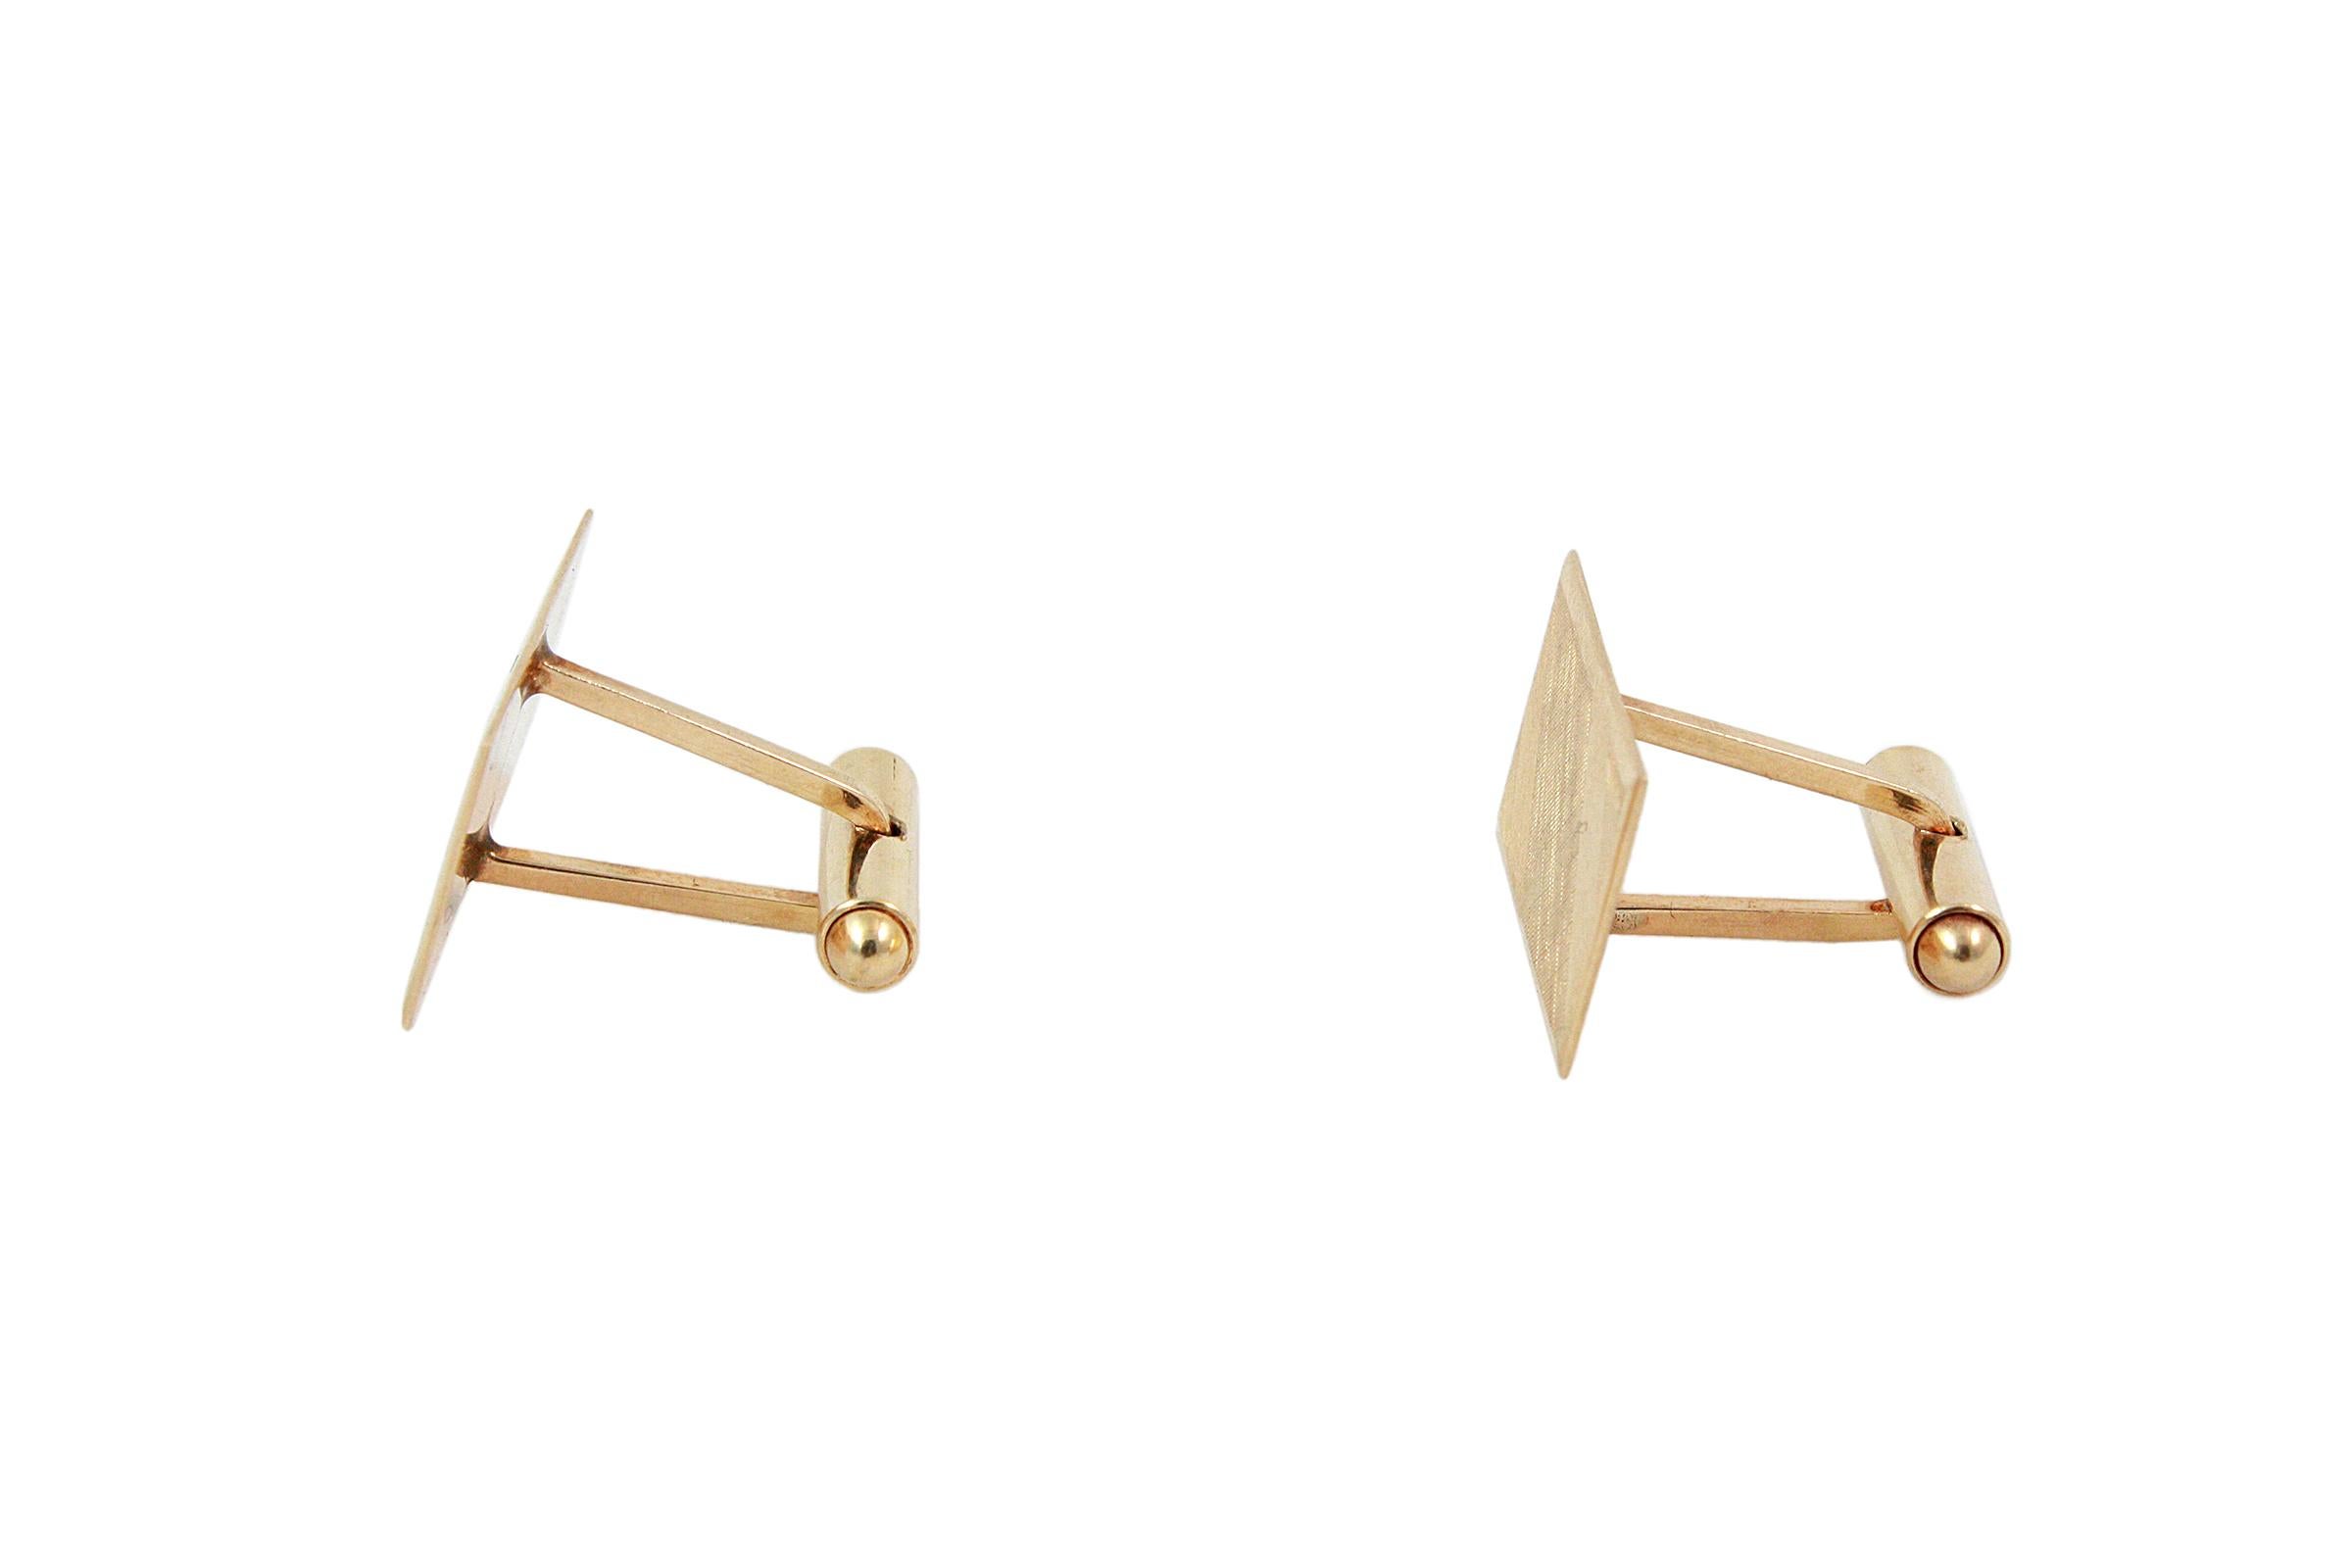 14K Yellow Gold Rectangular Cufflinks In Good Condition For Sale In Los Angeles, CA